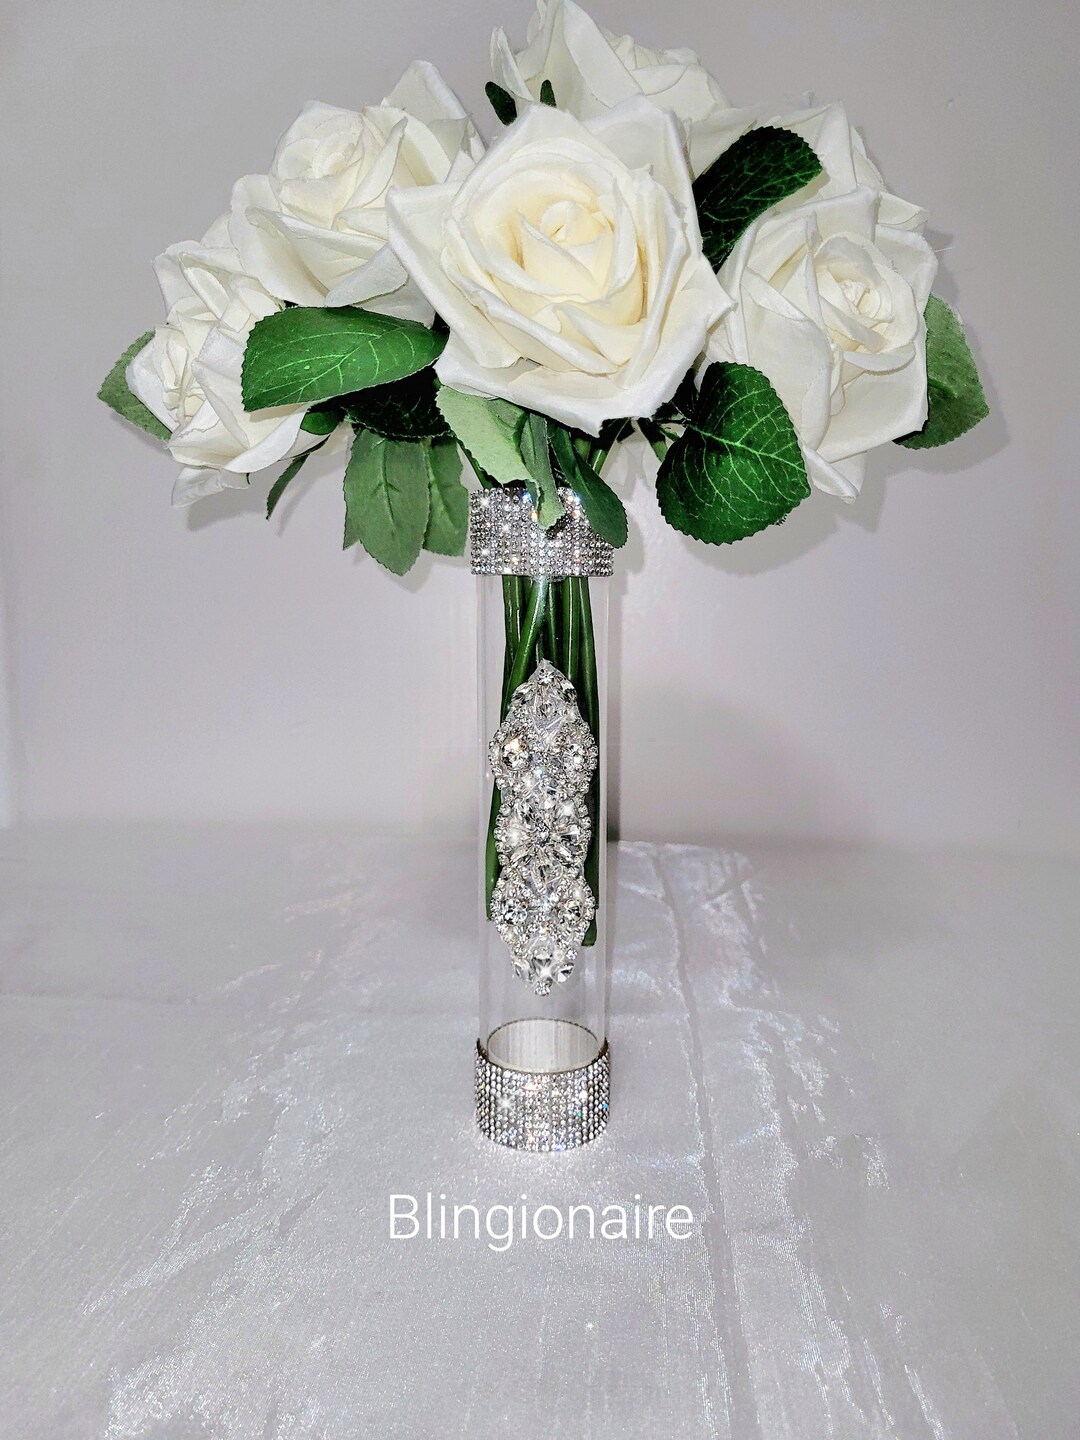  Rhinestone Bouquet Holder - Decorated Jeweled Wedding Bouquet  Holder, Bridal Handle Bouquet for Fresh/Real or Faux/Silk Flowers Bouquet  Holder- Holds 2 Dozen Flowers/Stems(Silver) : Handmade Products